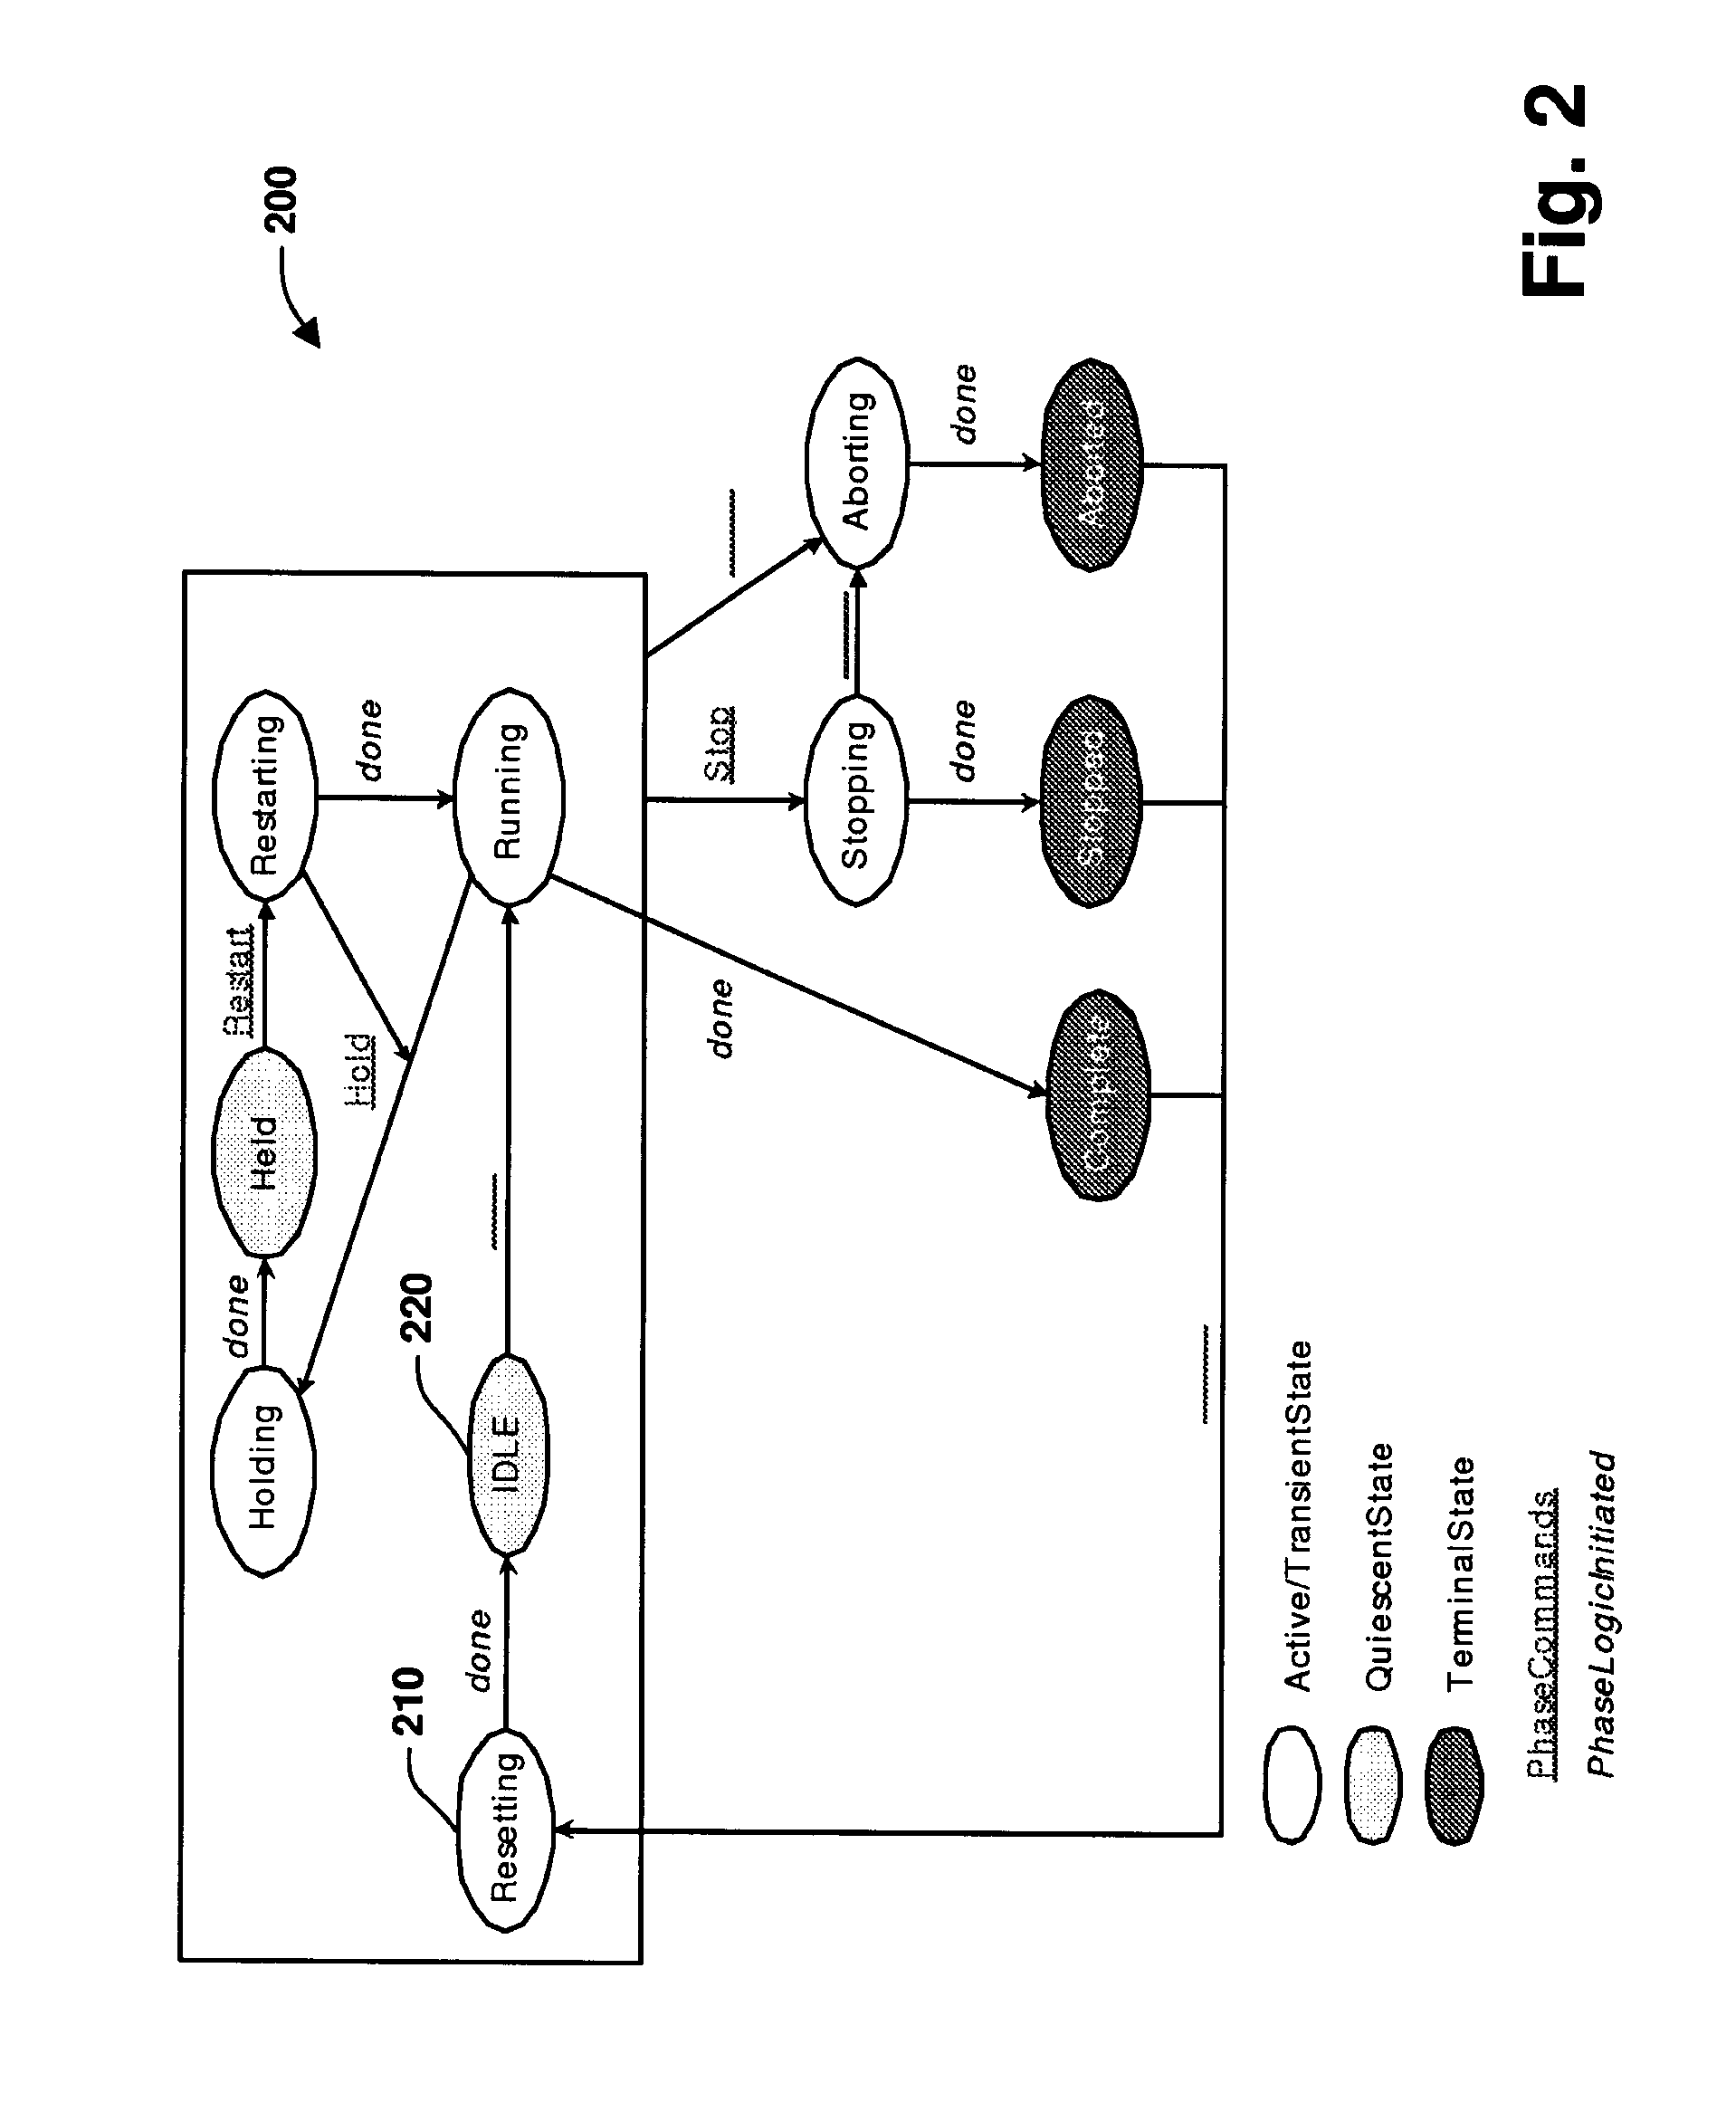 Controller equipment model systems and methods